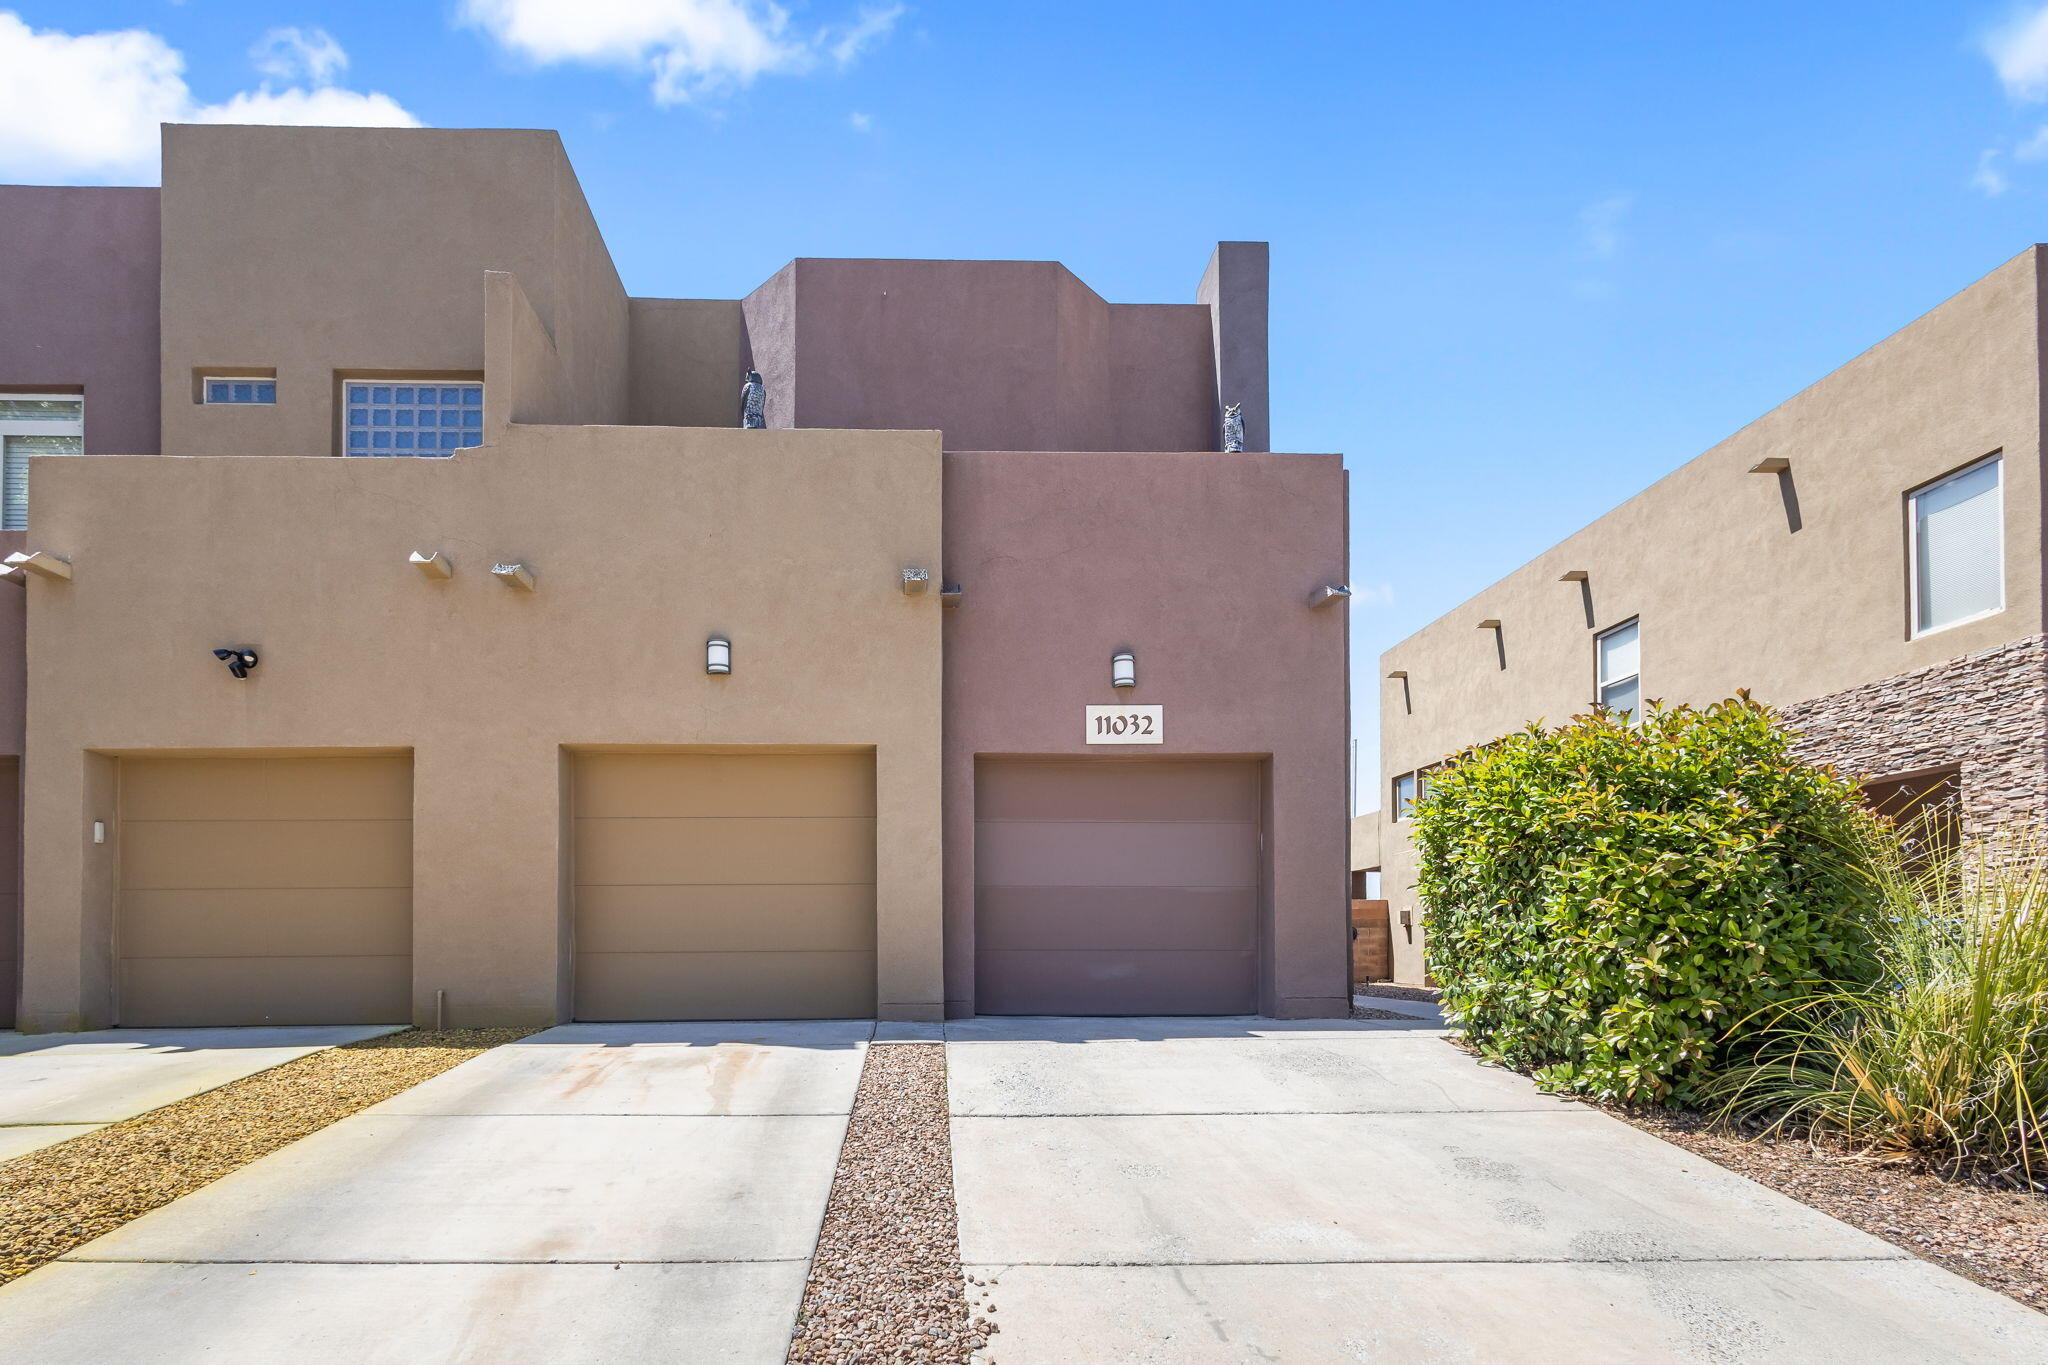 Attn VA buyers - Assumable 2.75% interest rate possible!Welcome to this beautiful townhouse minutes away from Kirtland AFB & Sandia National Labs! This stunning home features 4 bedrooms, 2.5 baths & an open loft that includes a walk out deck. New AC! Low-E top quality windows keep this home efficient & quiet. 2 car garage, separate laundry room with gas/electric W/D hookups, near end of Cul-De-Sac with amazing views of the Sandia & Manzano Mountains. This home has it all, schedule your showing today!